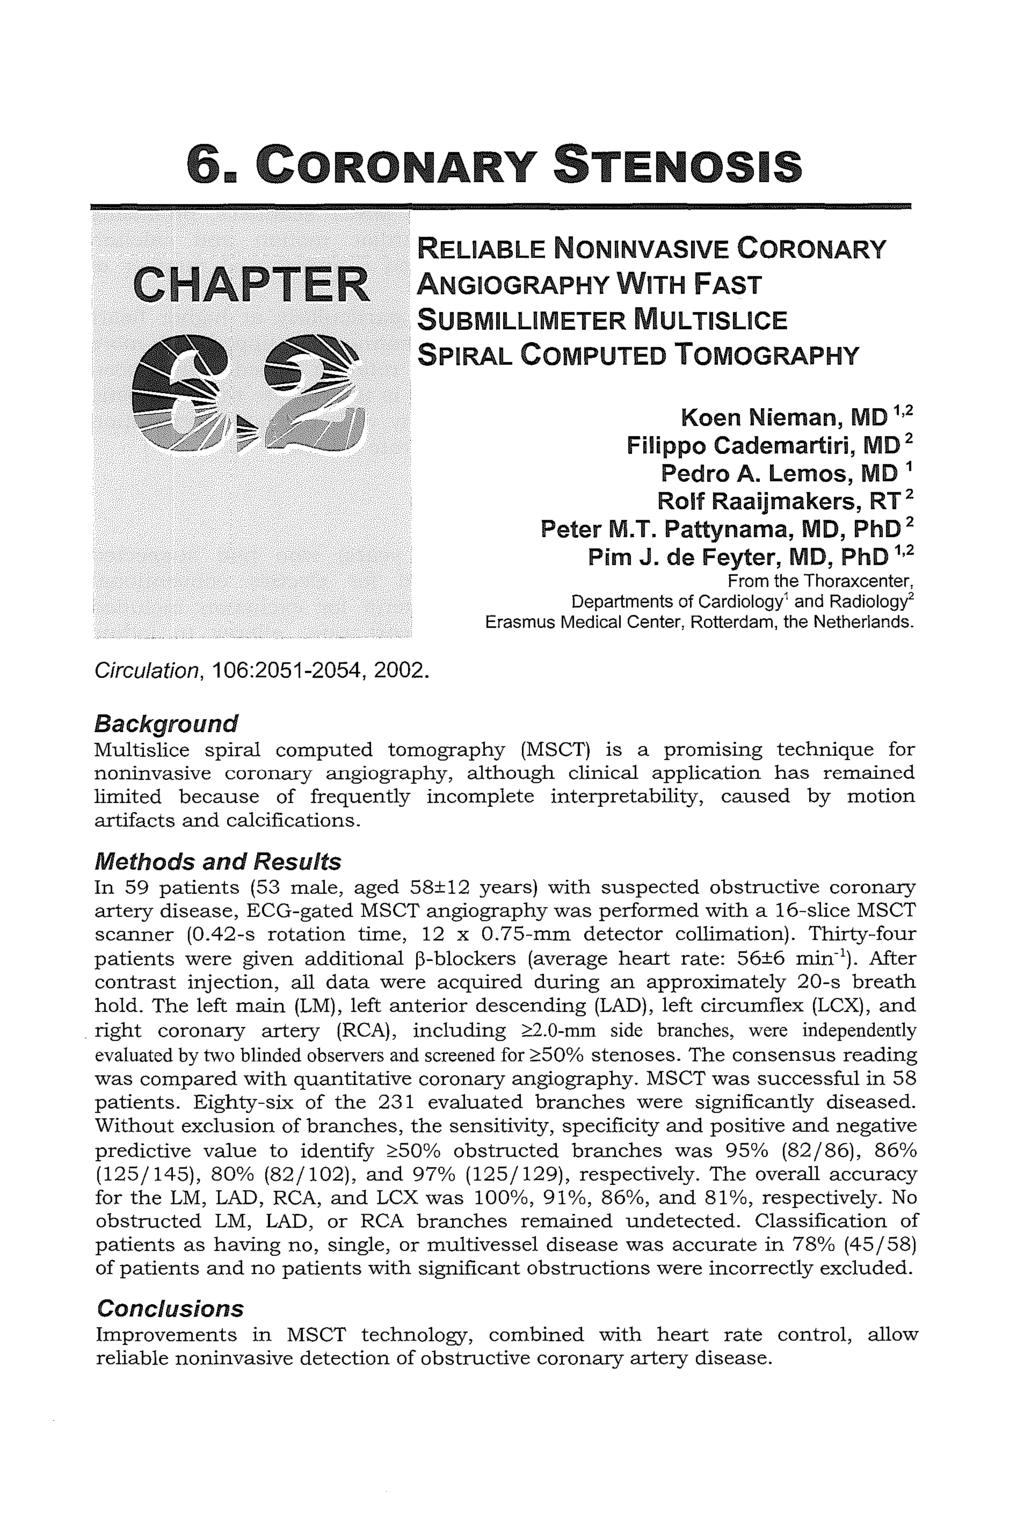 6. ORONARY STENOSIS CHAPTER RELIABLE NONINVASIVE CORONARY ANGIOGRAPHY WiTH FAST SUBMILUMETER MUL TISUCE SPIRAL COMPUTED TOMOGRAPHY Koen Nieman, MD 1 ' 2 Filippo Cademartiri, MD 2 Pedro A.